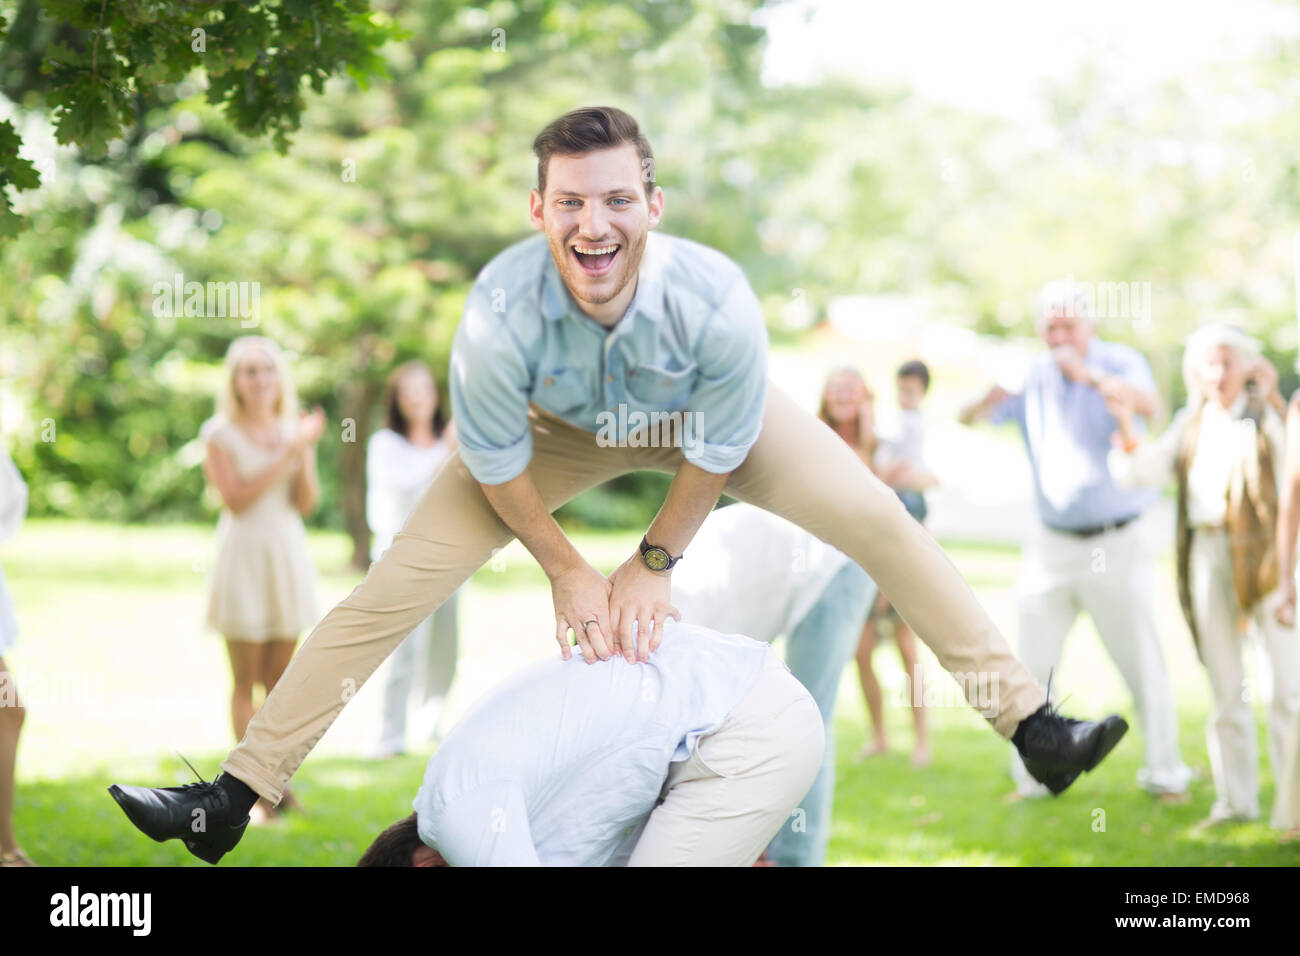 Happy young man playing leapfrog in park Stock Photo